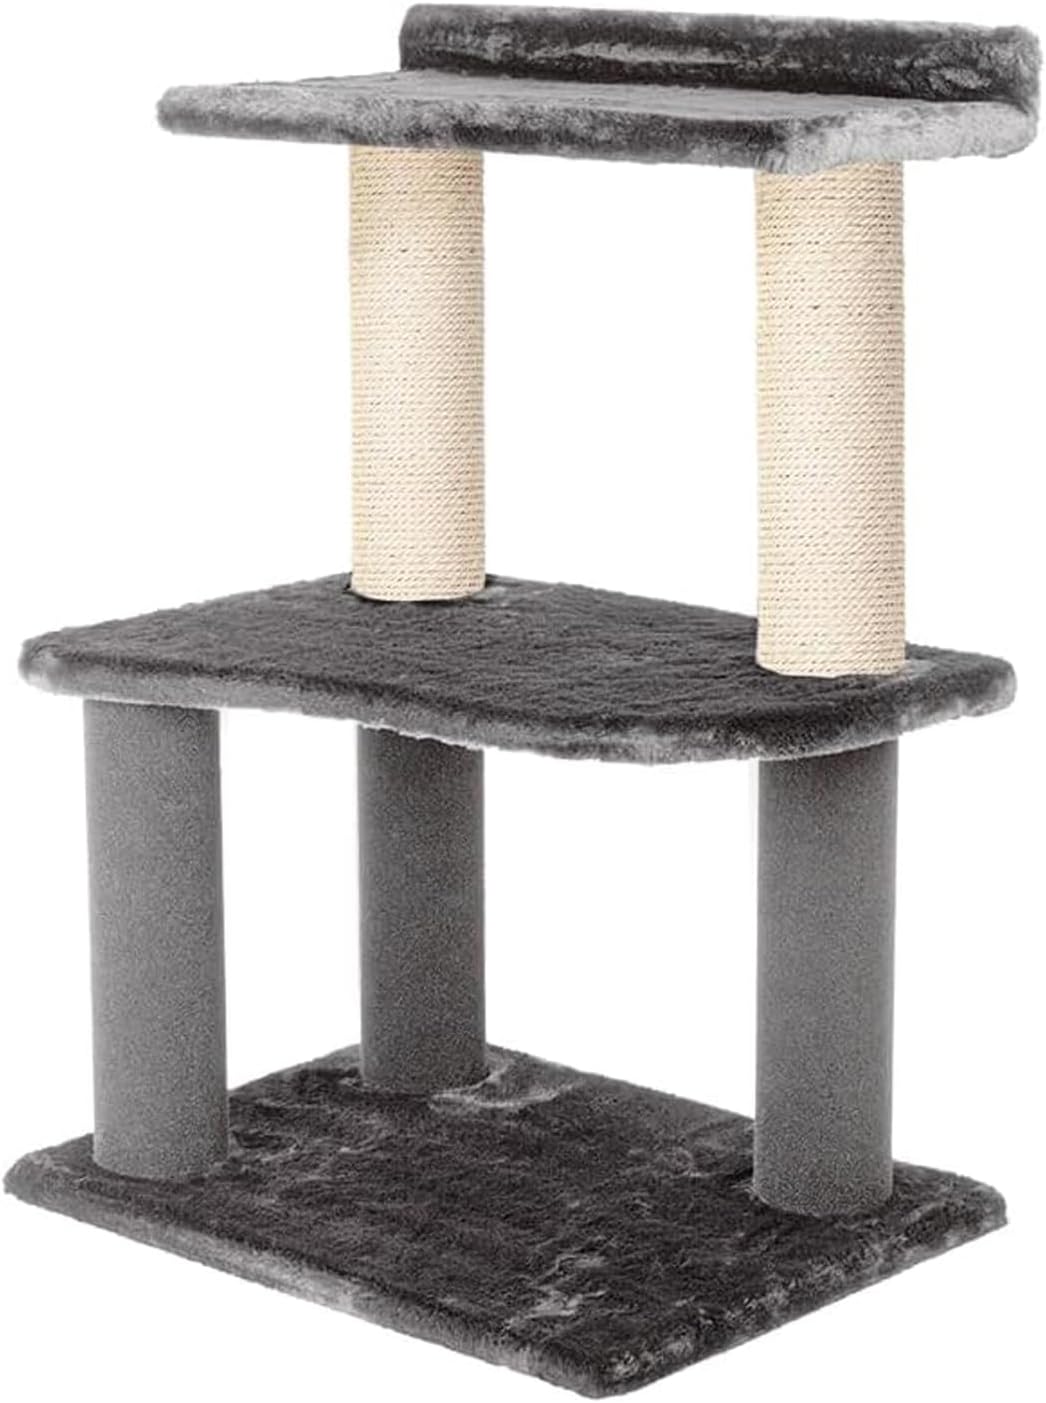 34 Inch Classic Comfort for Indoor Modern Premium Cats and Kittens Scratcher Larger Base for Better Stability, (Grey/Natural)